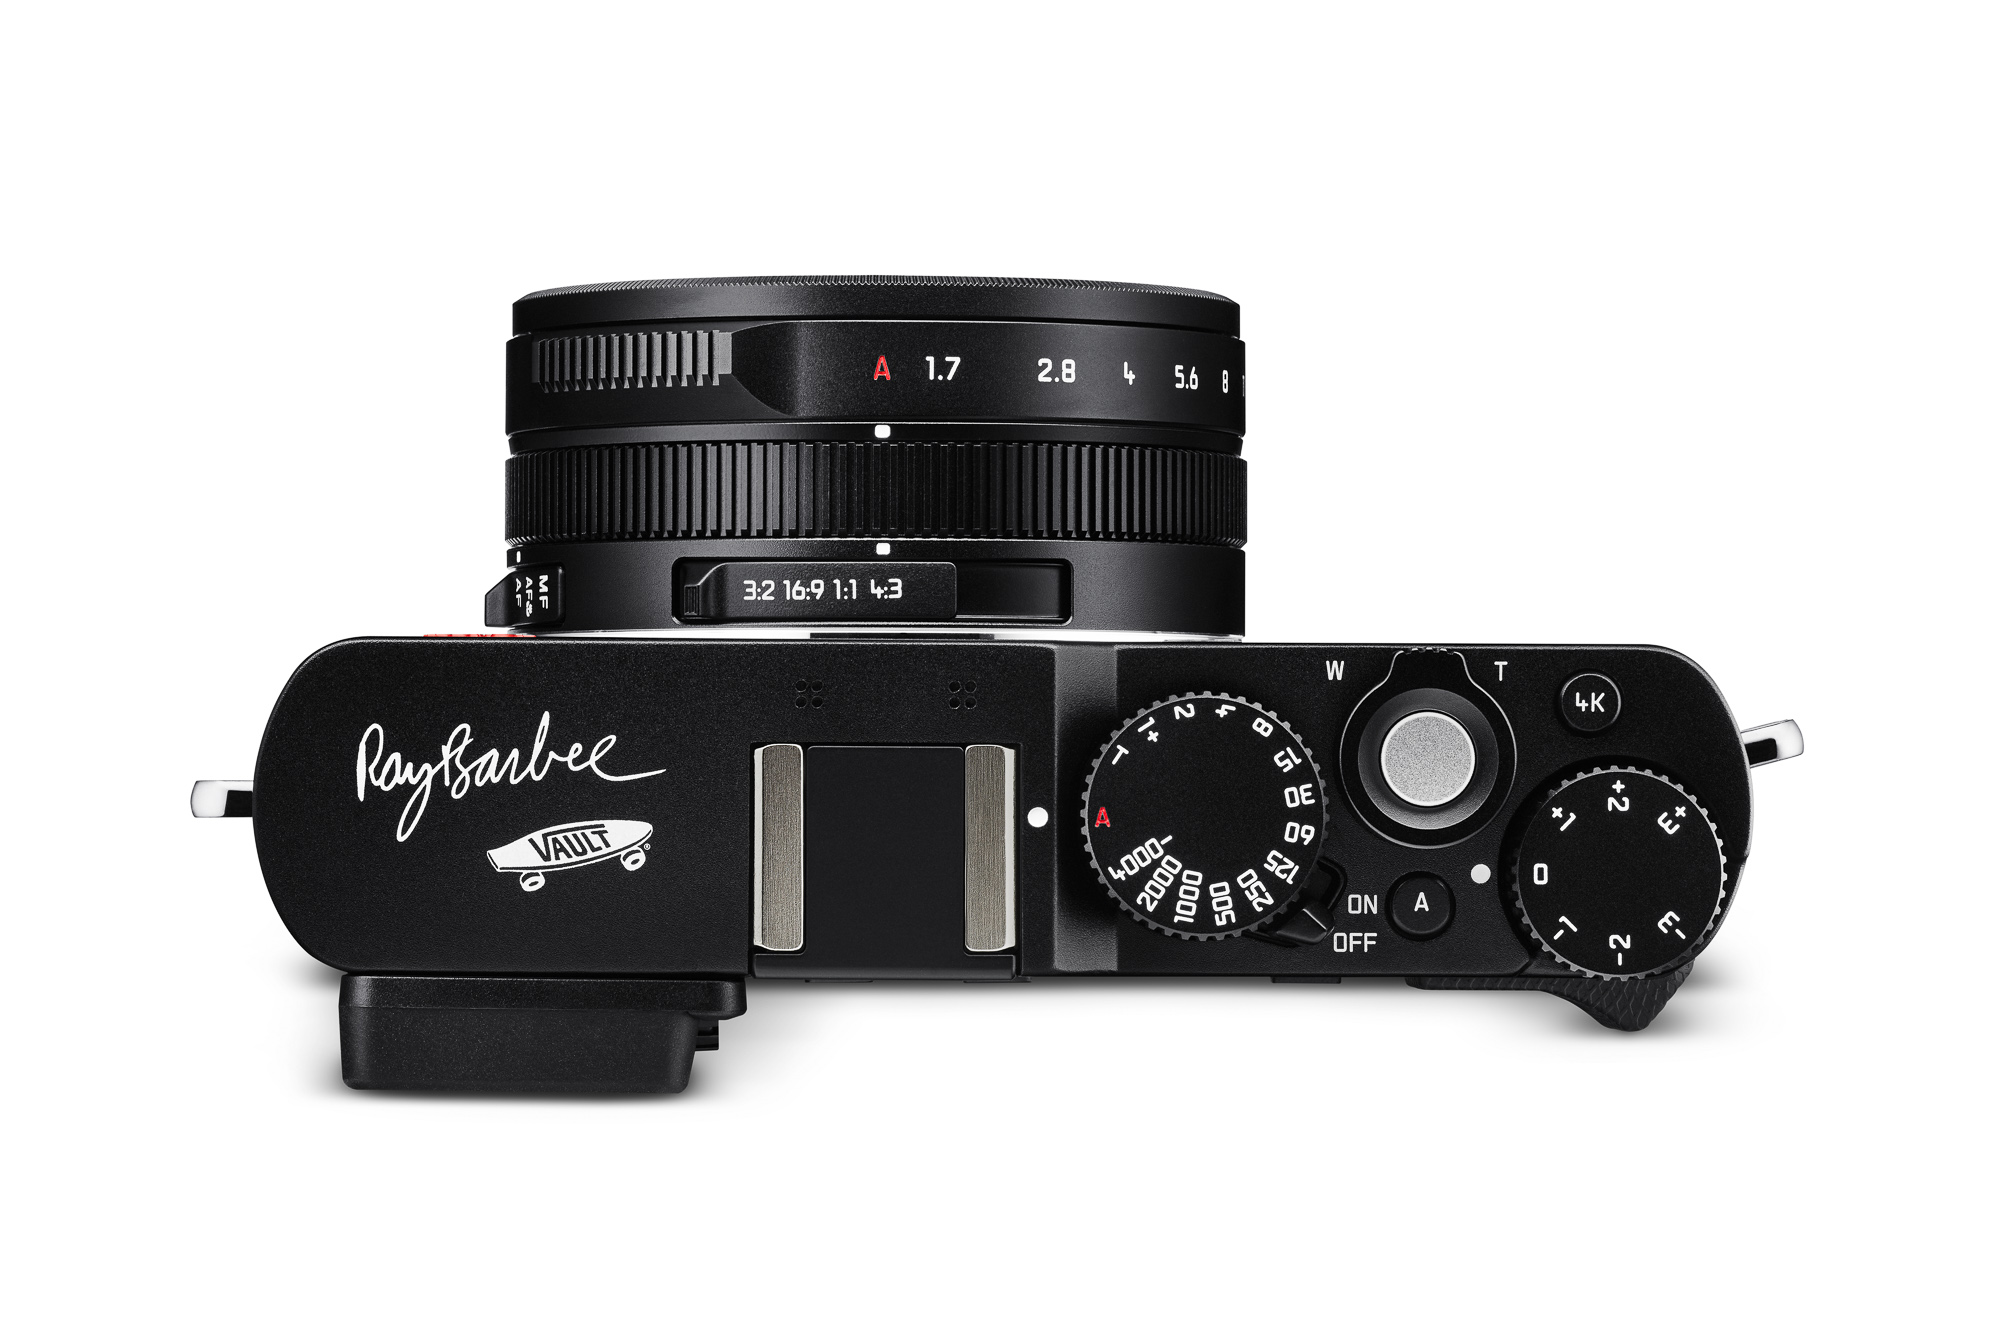 Leica D-Lux 7 Vans x Ray Barbee Edition 19171 - US